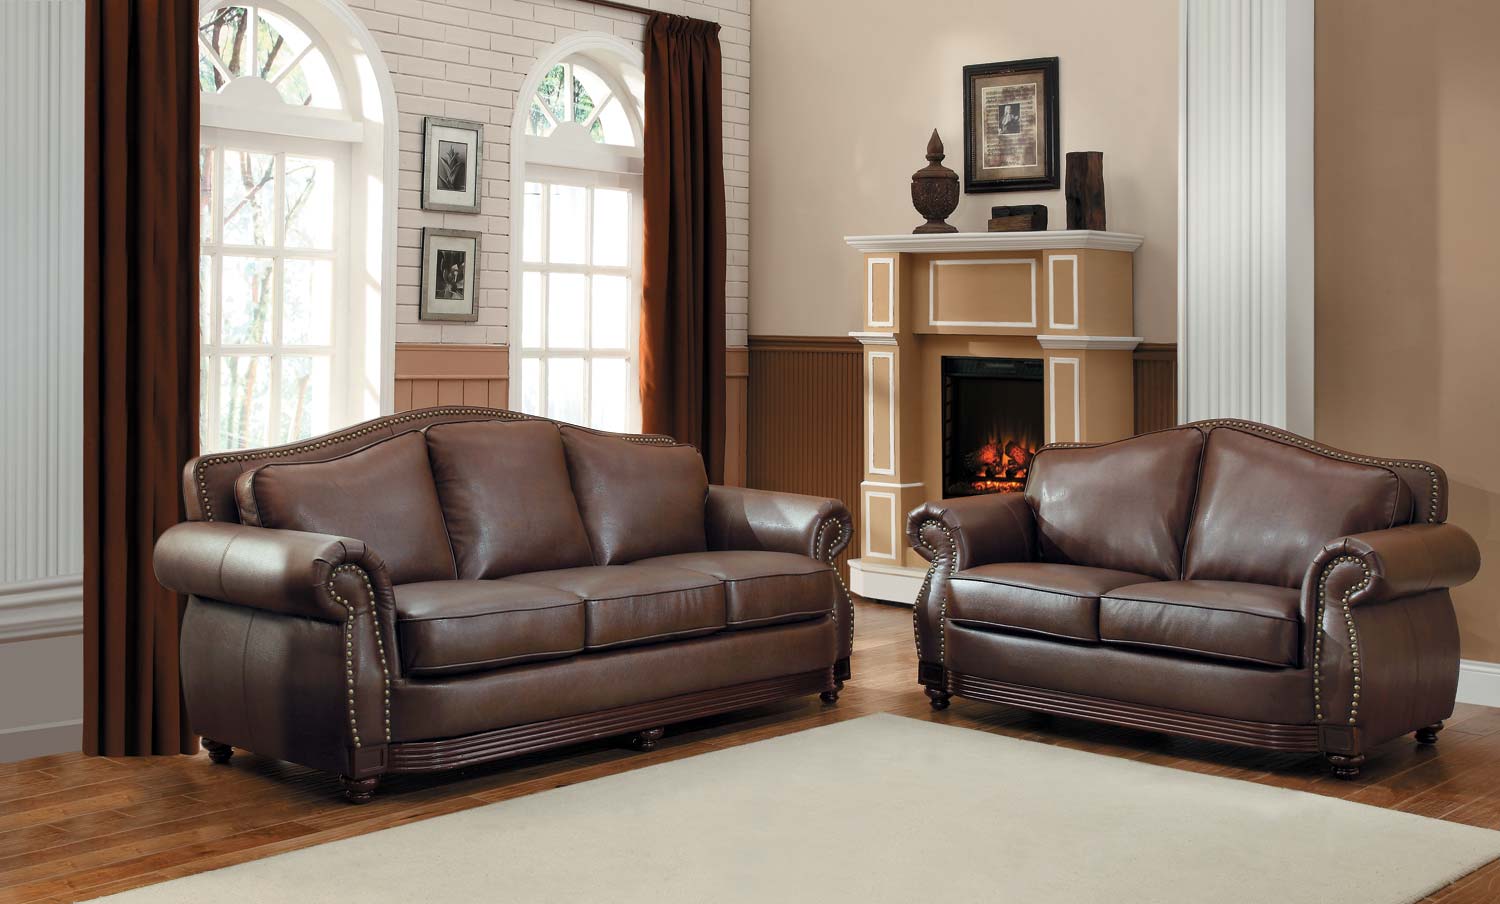 Homelegance Midwood Bonded Leather Sofa Collection - Dark Brown